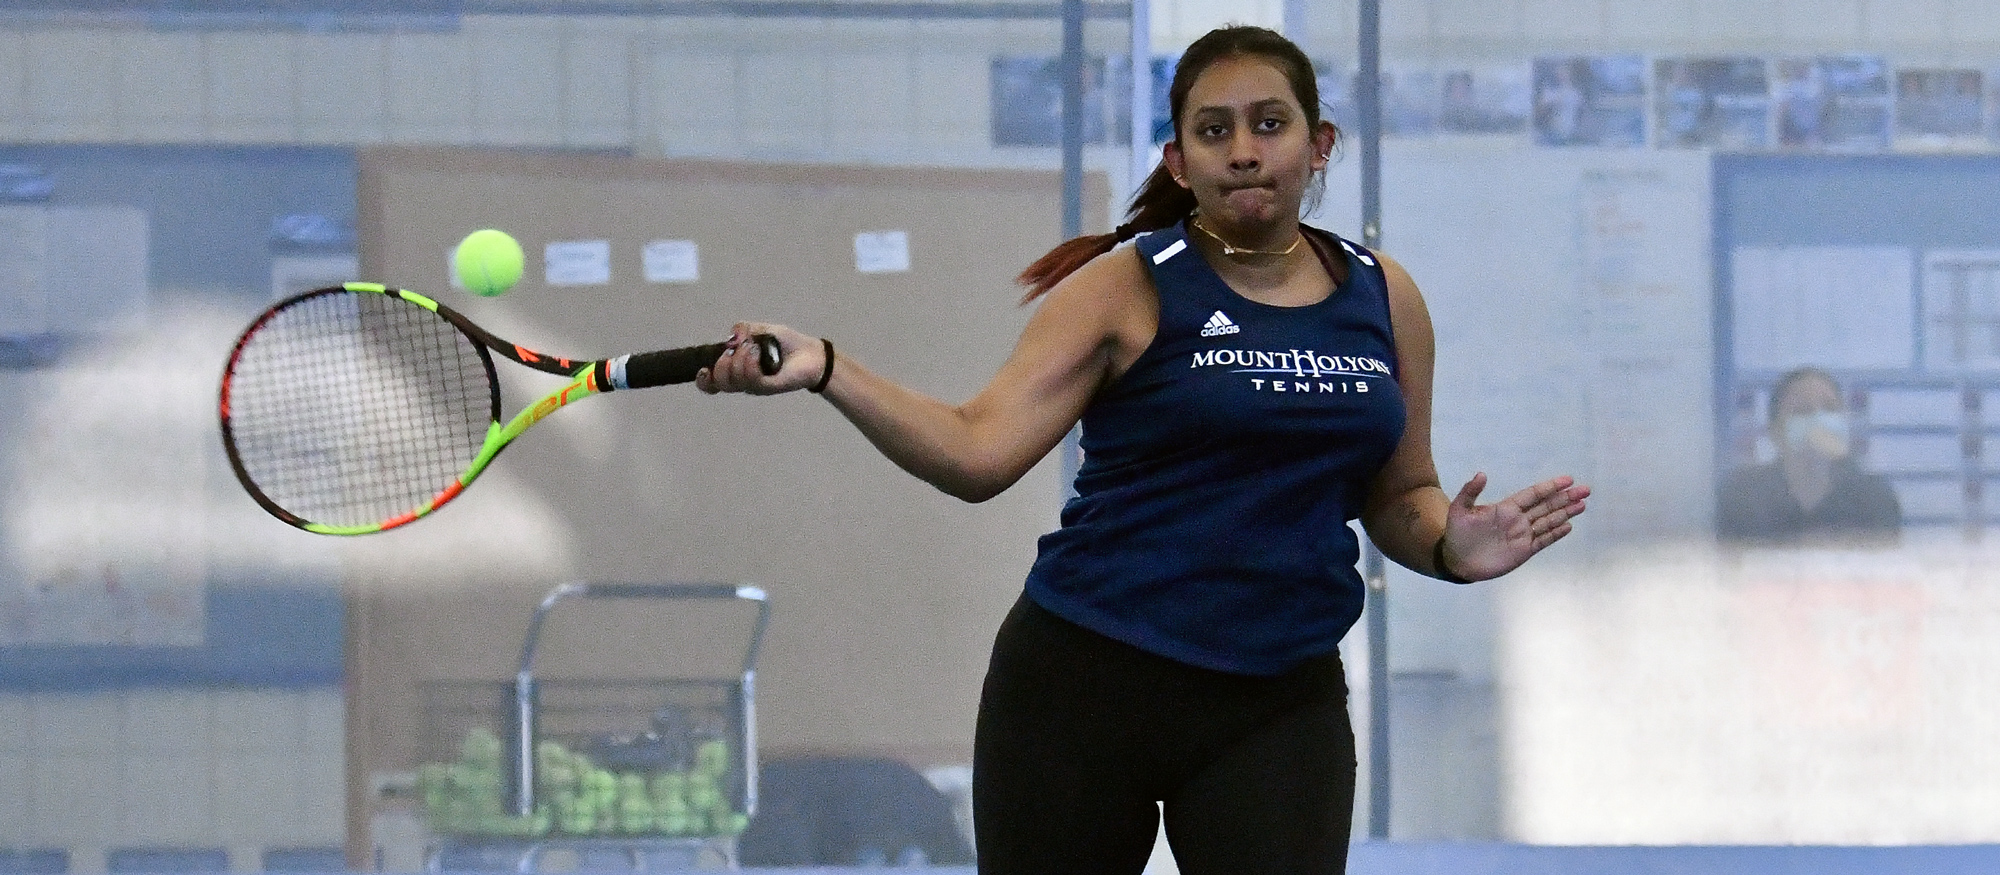 Shweta Kiran Cavale (pictured) and Cal Smith teamed up to win their first-round matchup in the C Draw of the NEWITT on Oct. 7, 2022. (RJB Sports file photo)